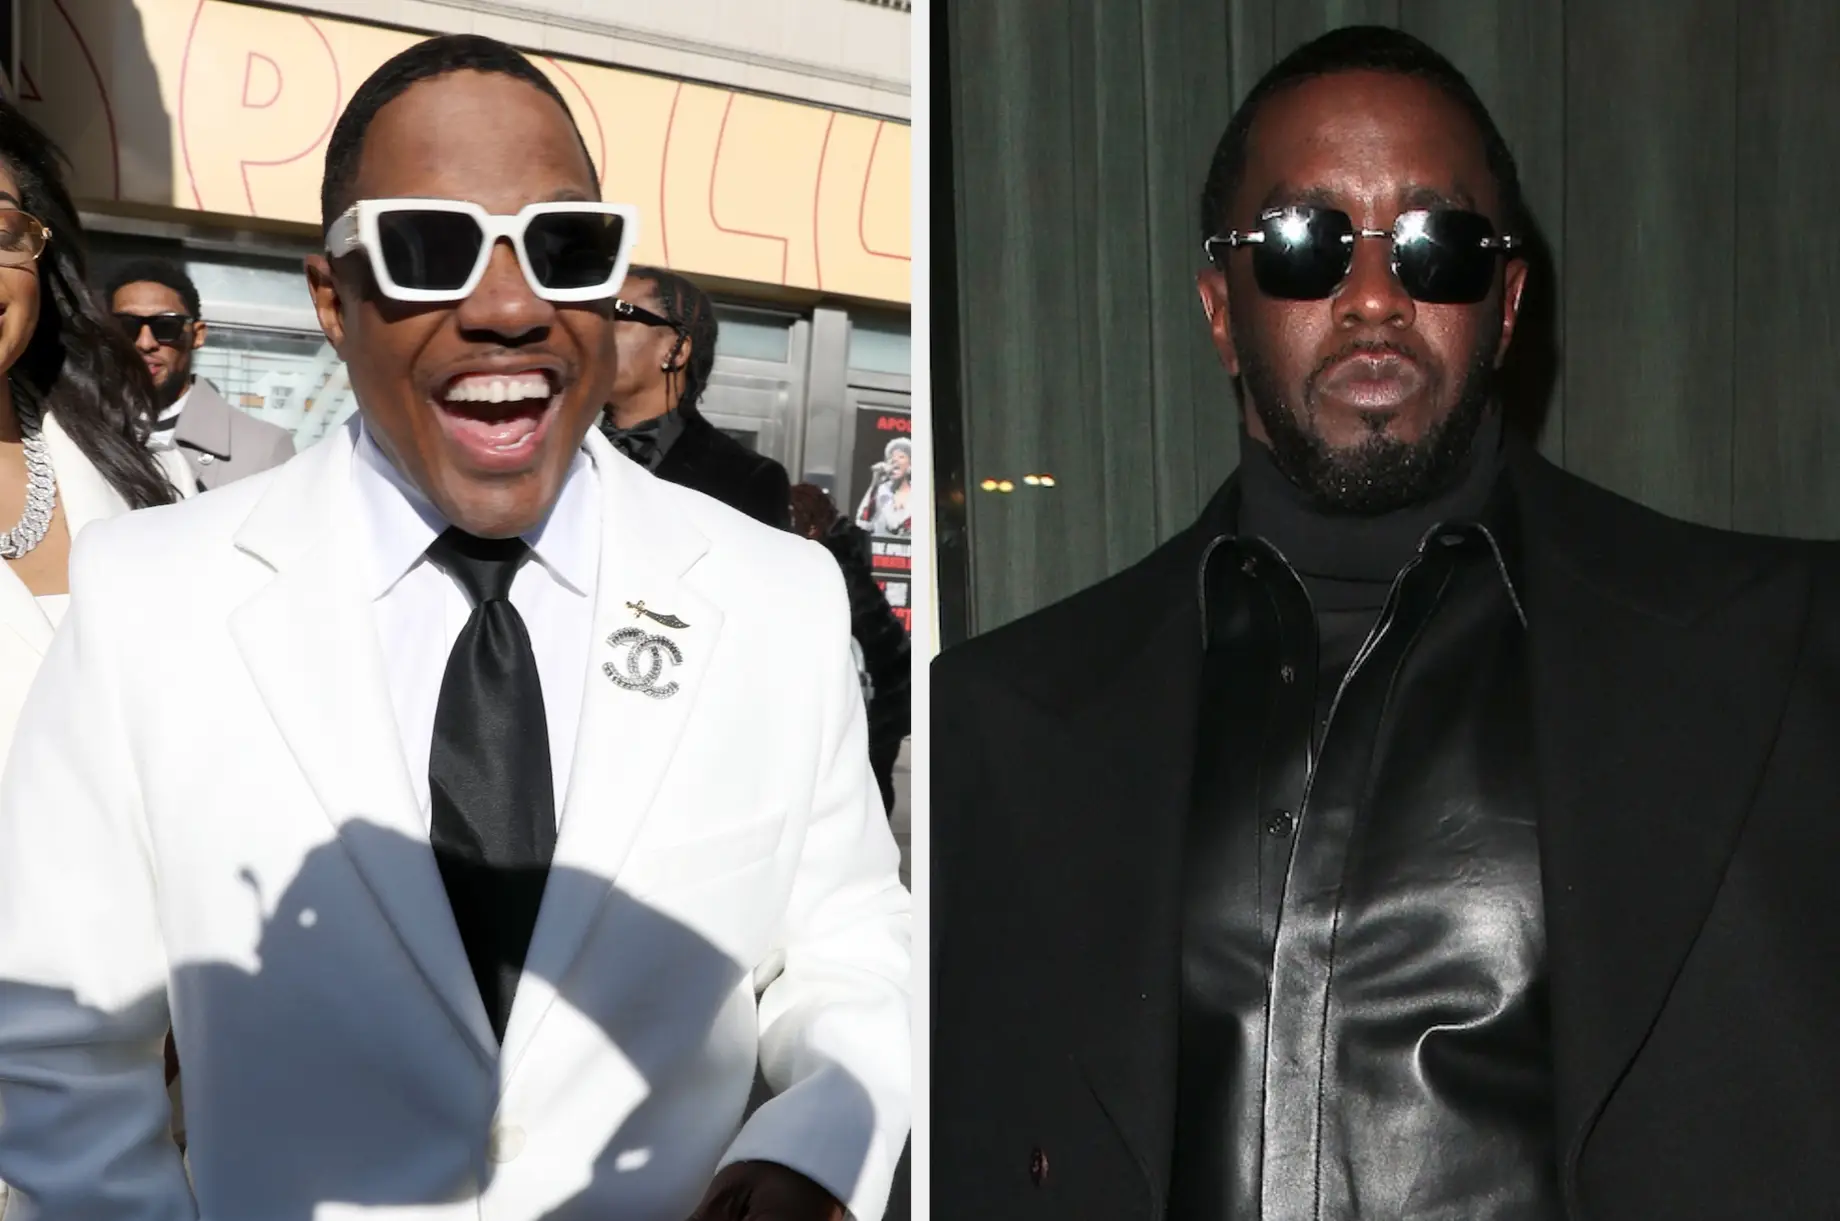 Mase Reacts to Feds Raiding Diddy’s Homes: ‘Reparations Is Getting Closer’ [Video]